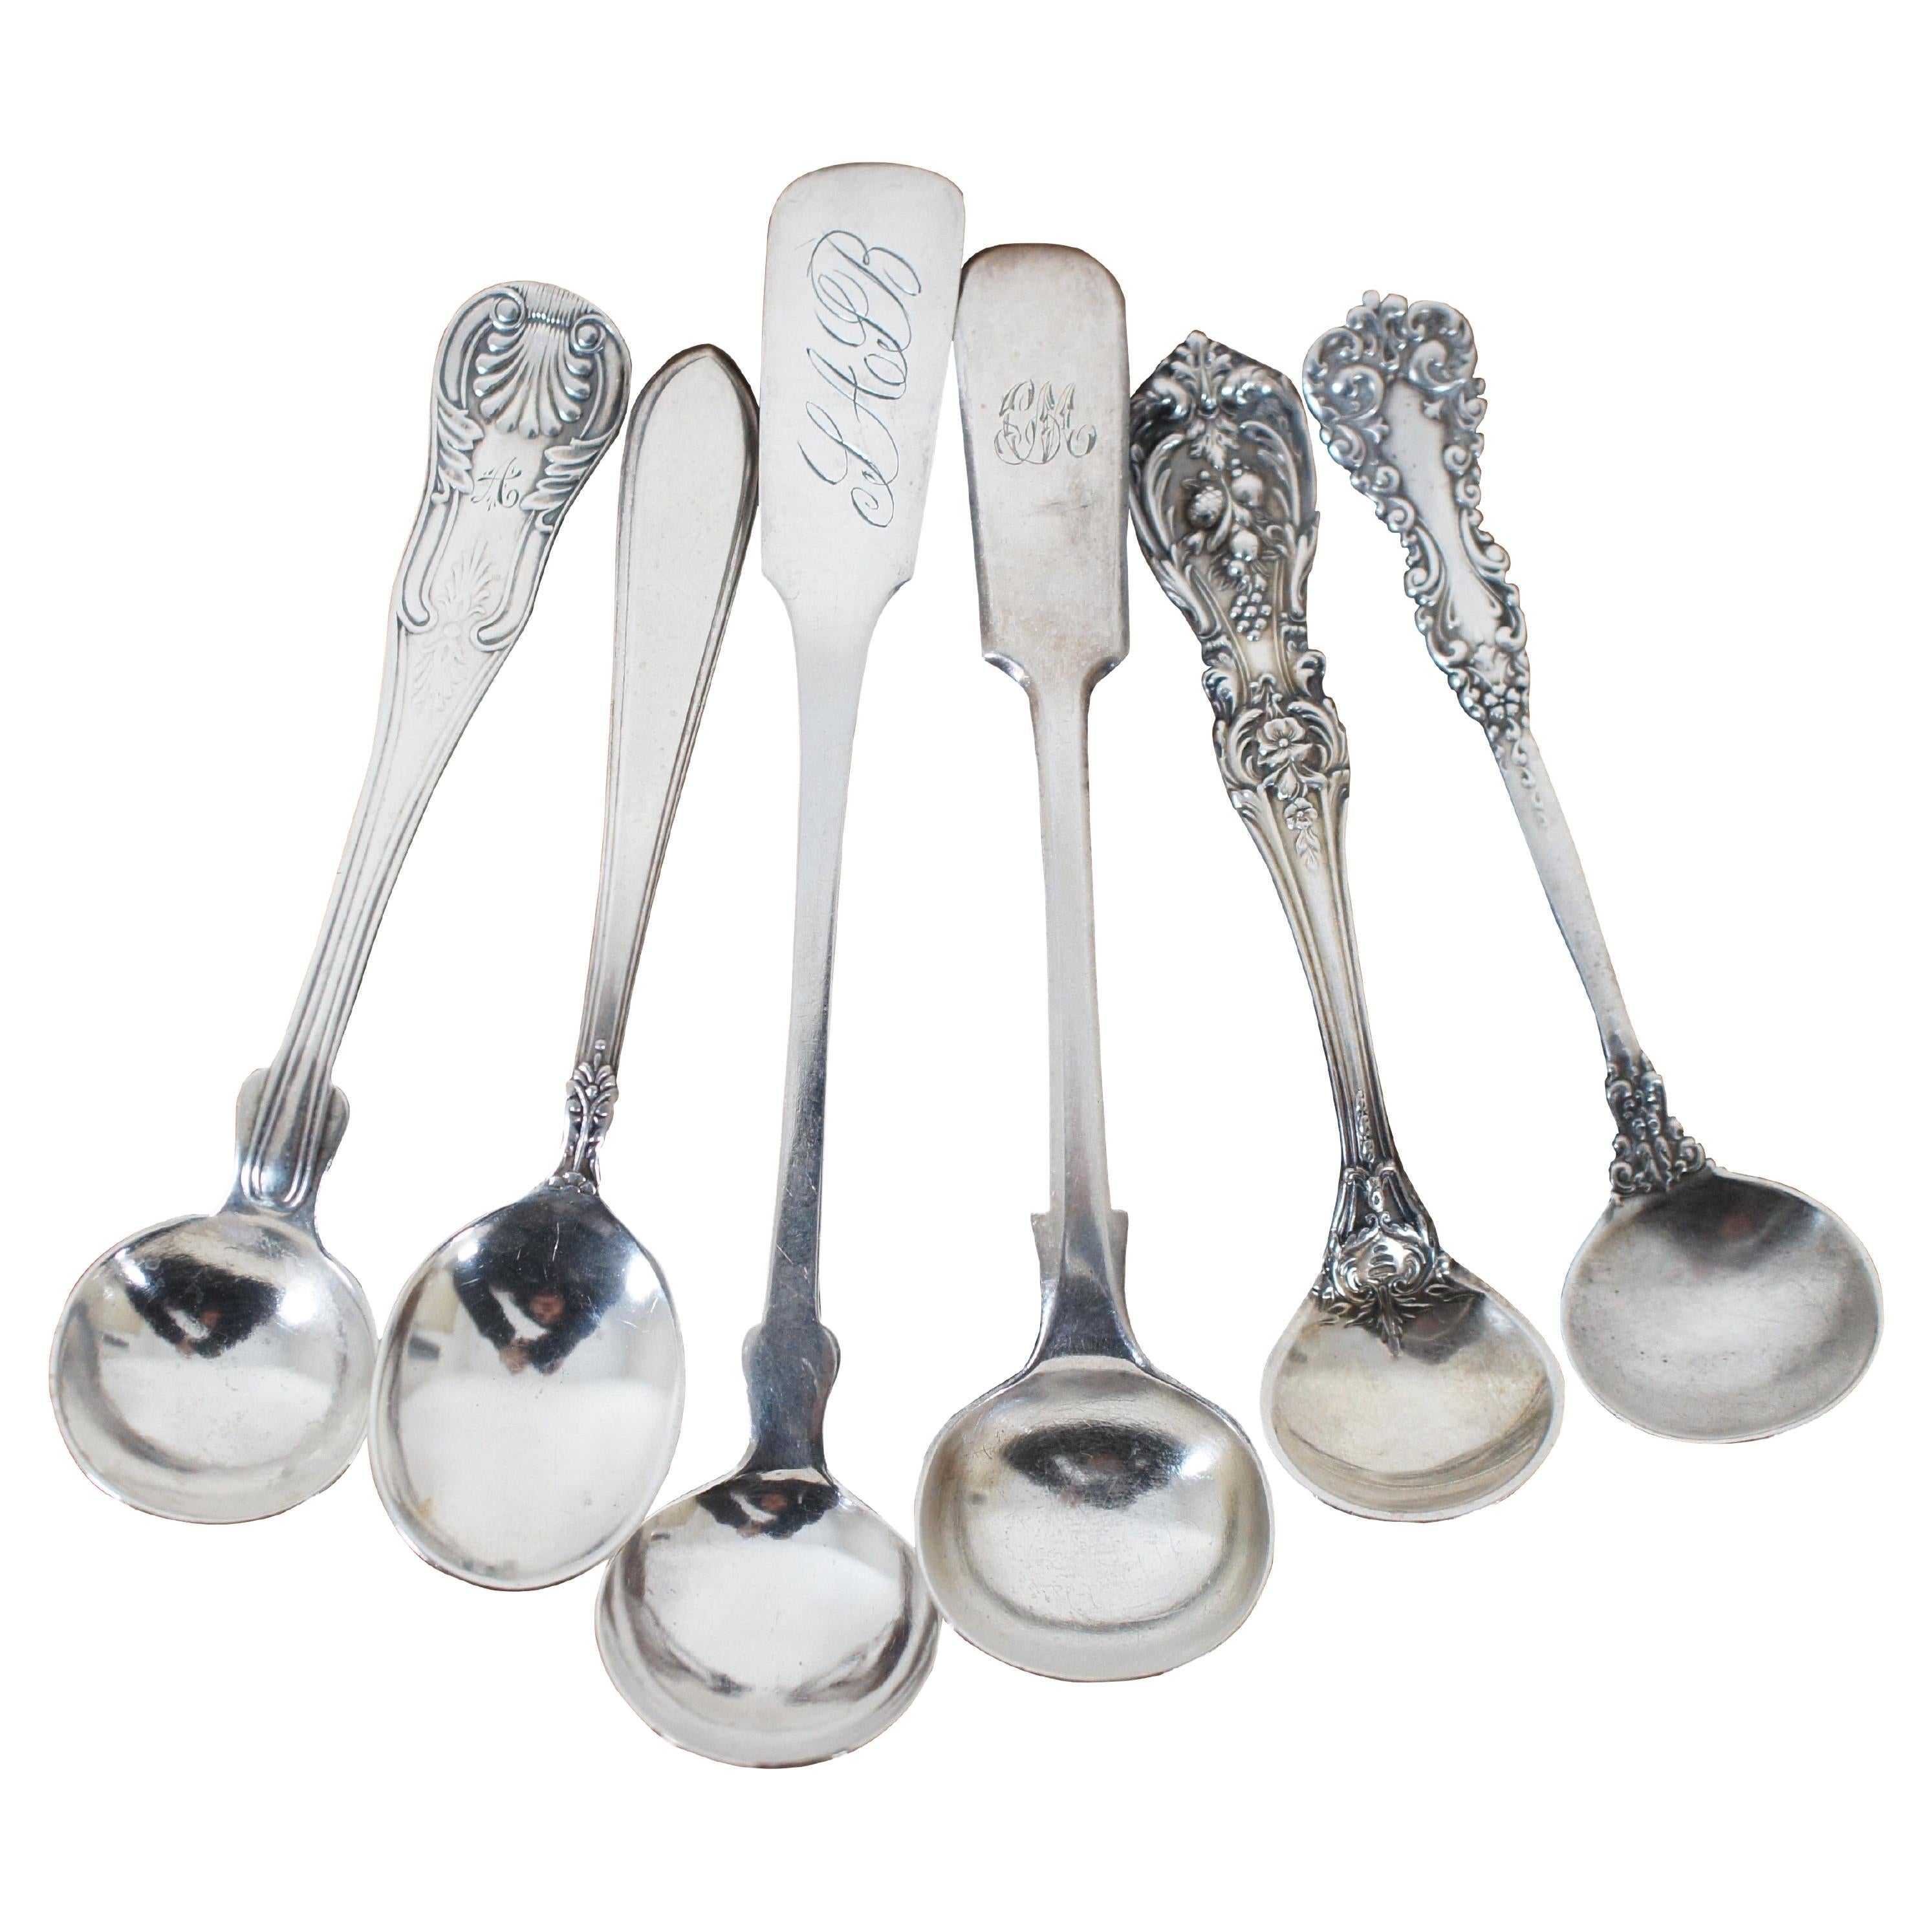 6 Antique Assorted Sterling Silver Tea Coffee Spoons 67g